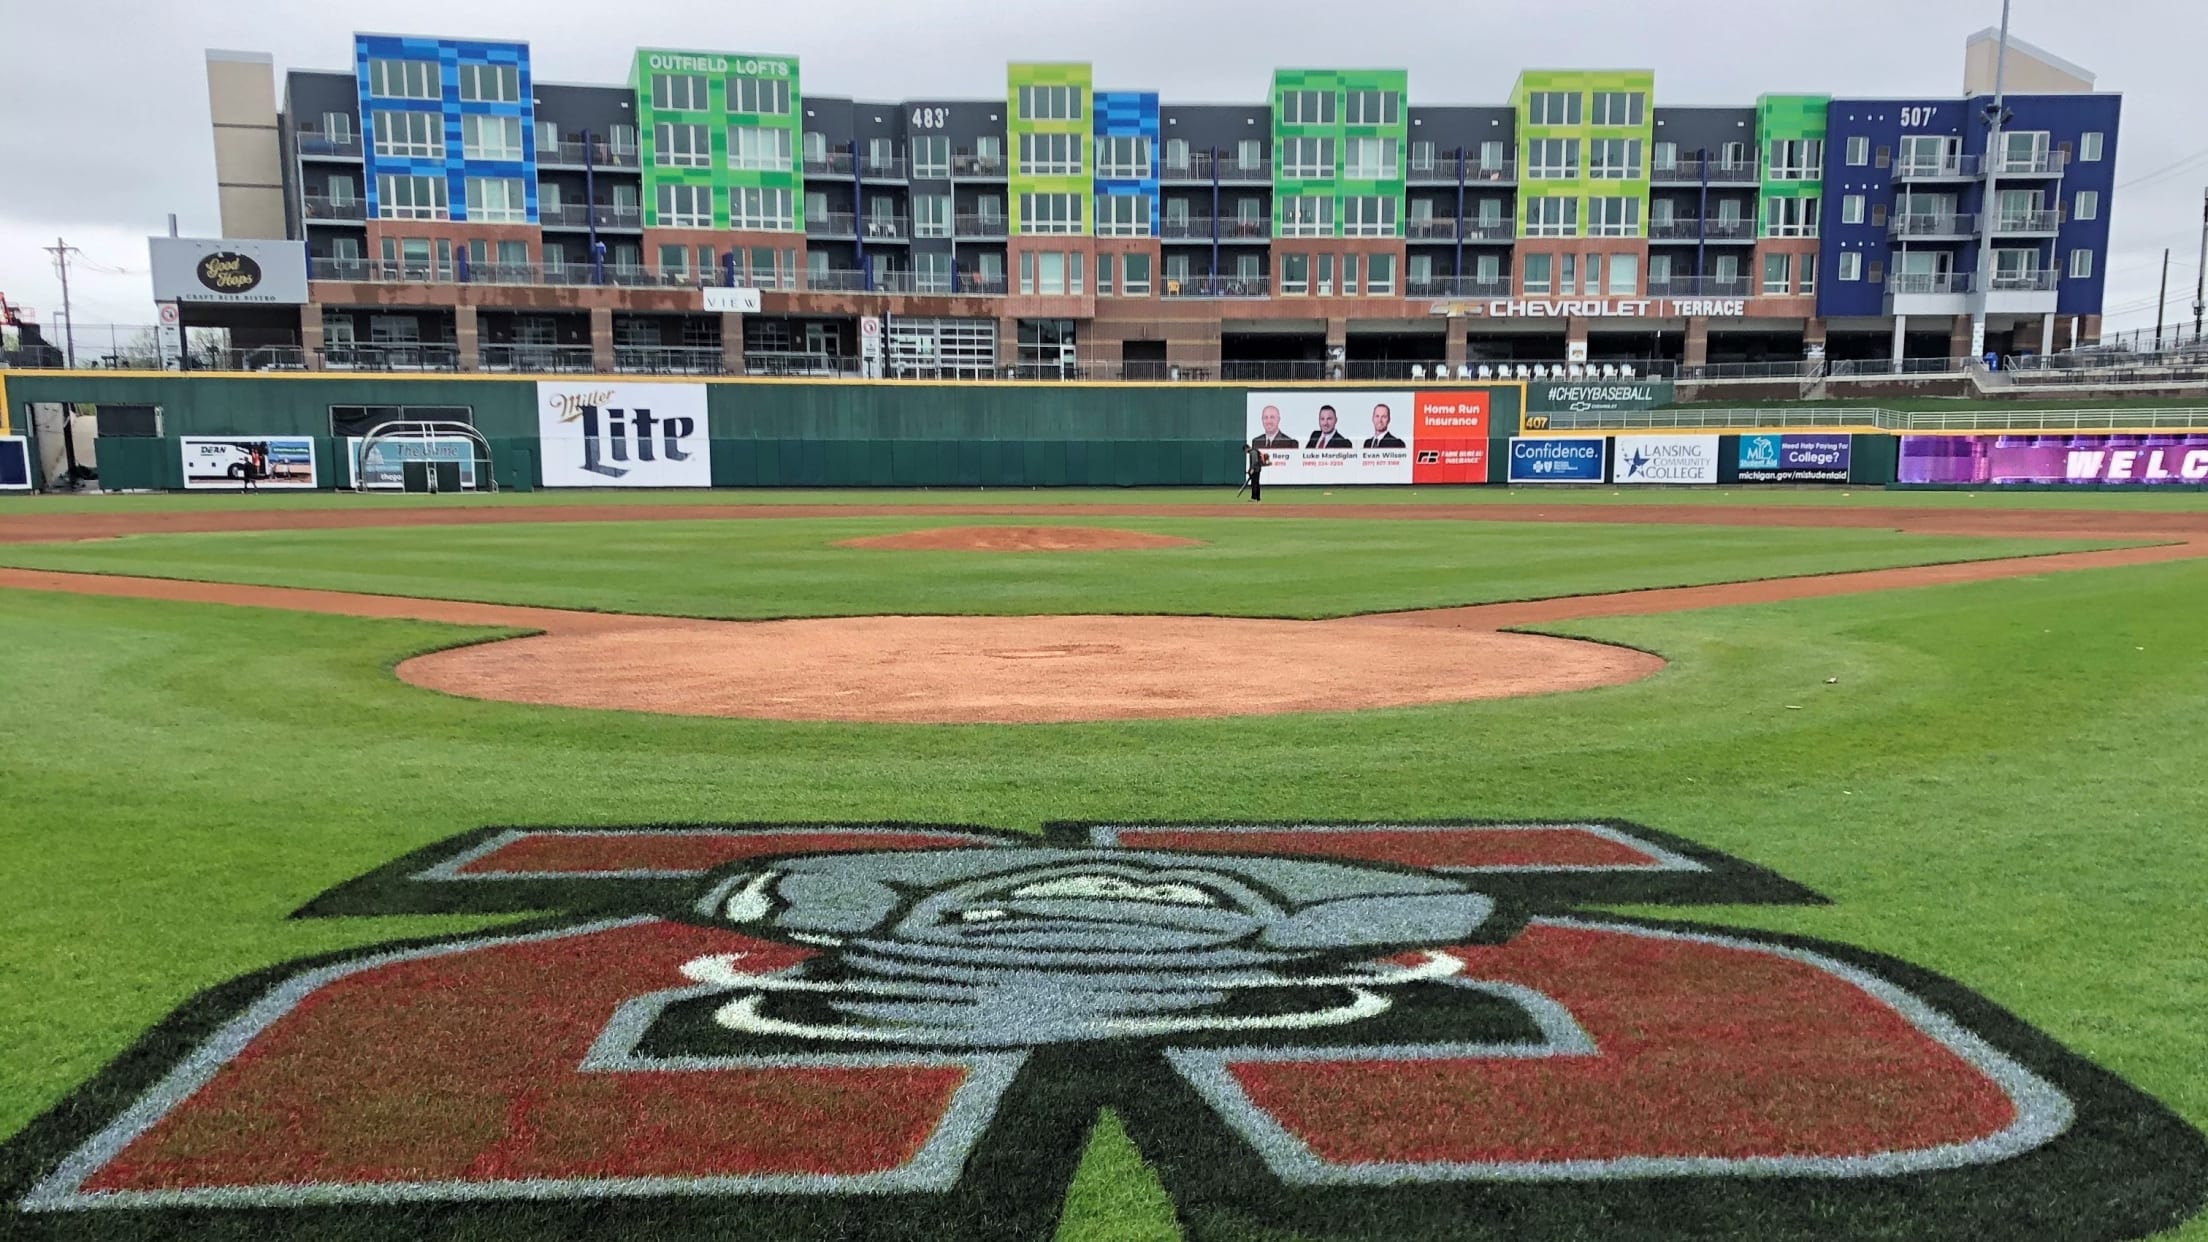 Lansing Lugnuts prepare for new season and a lot of changes in